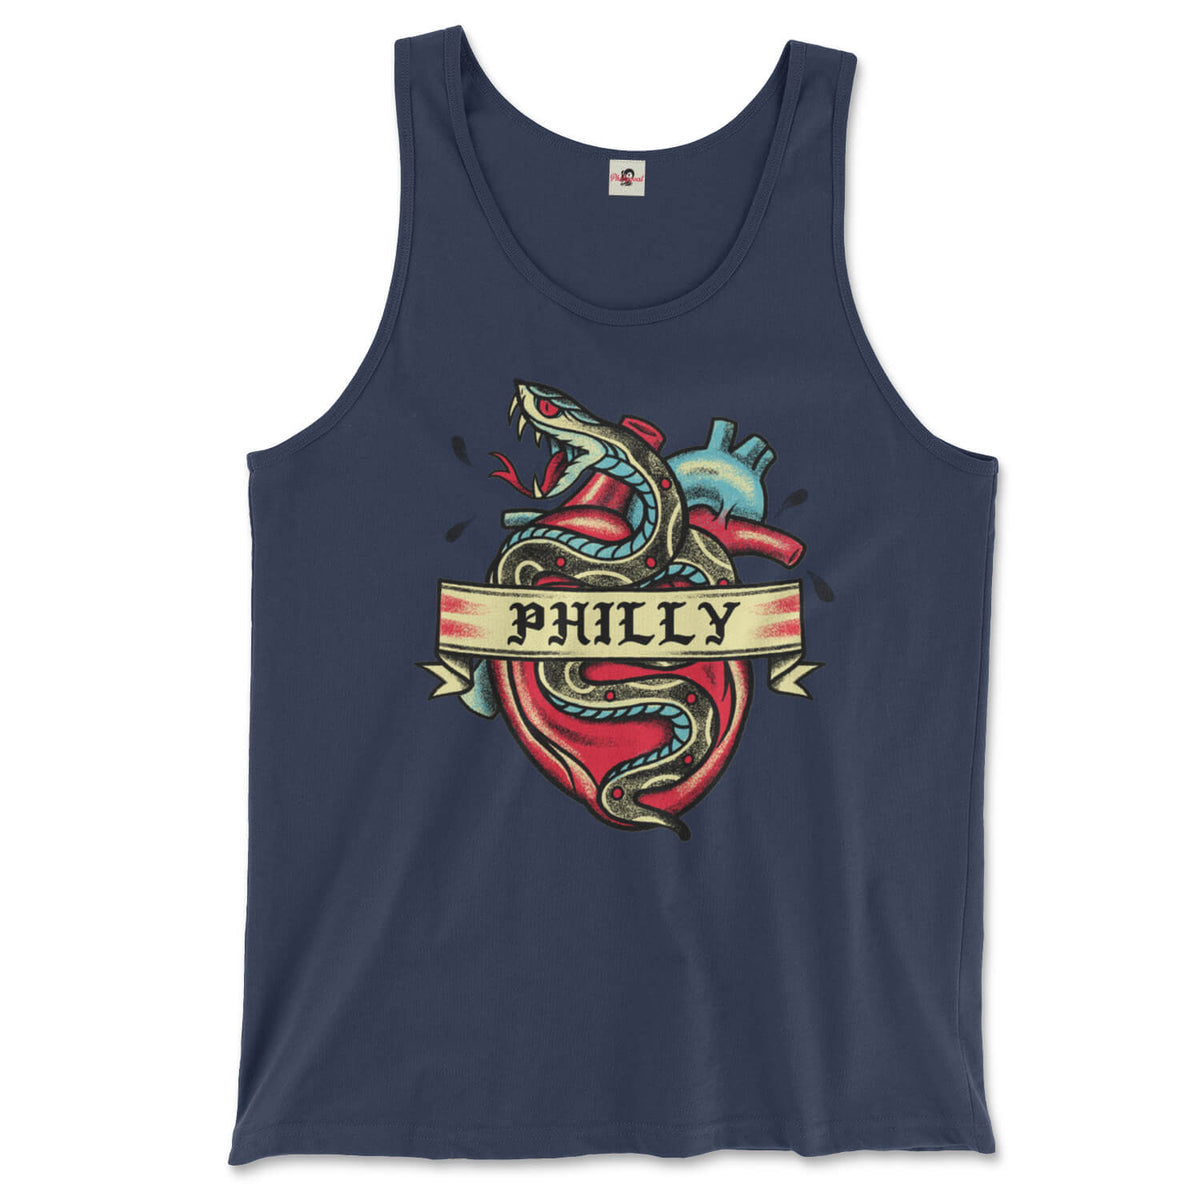 Philadelphia philly snake heart tattoo on a navy blue tank top from Phillygoat